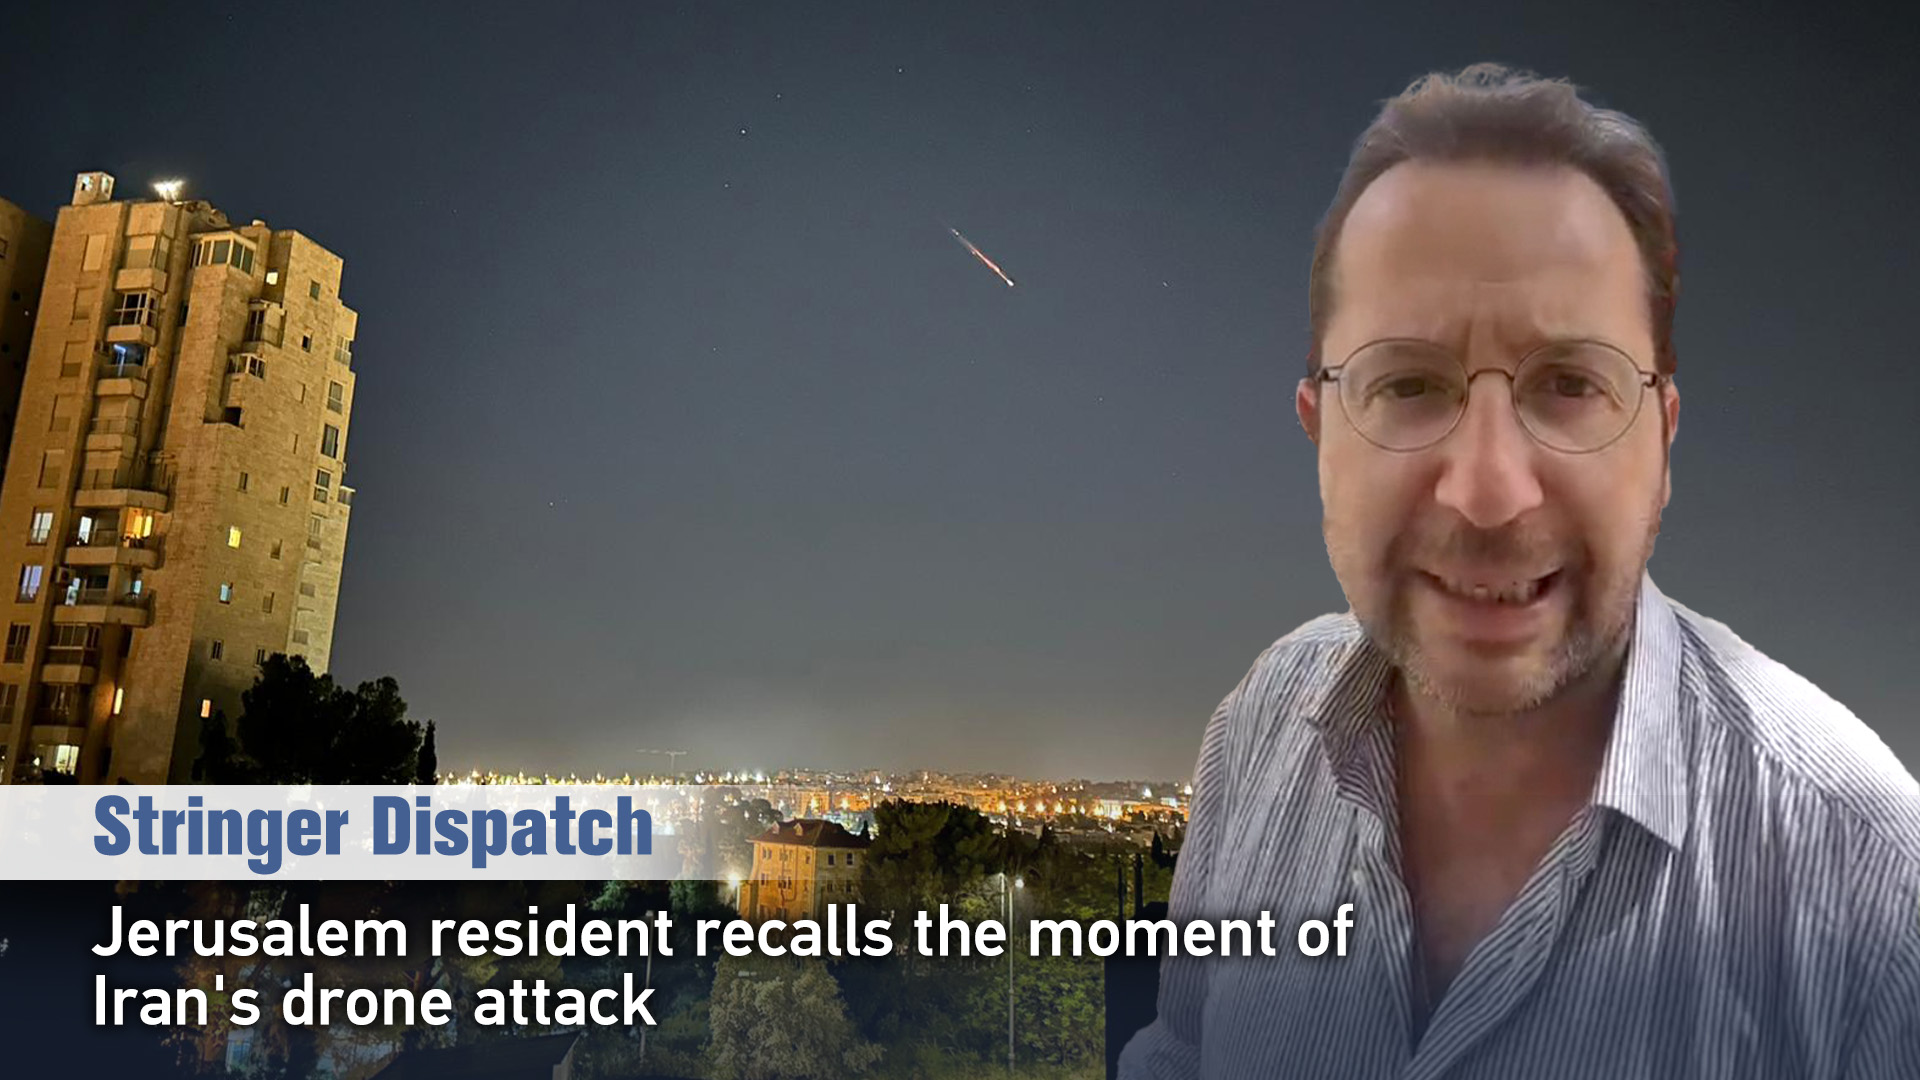 Jerusalem resident recalls the moment of Iran's drone attack